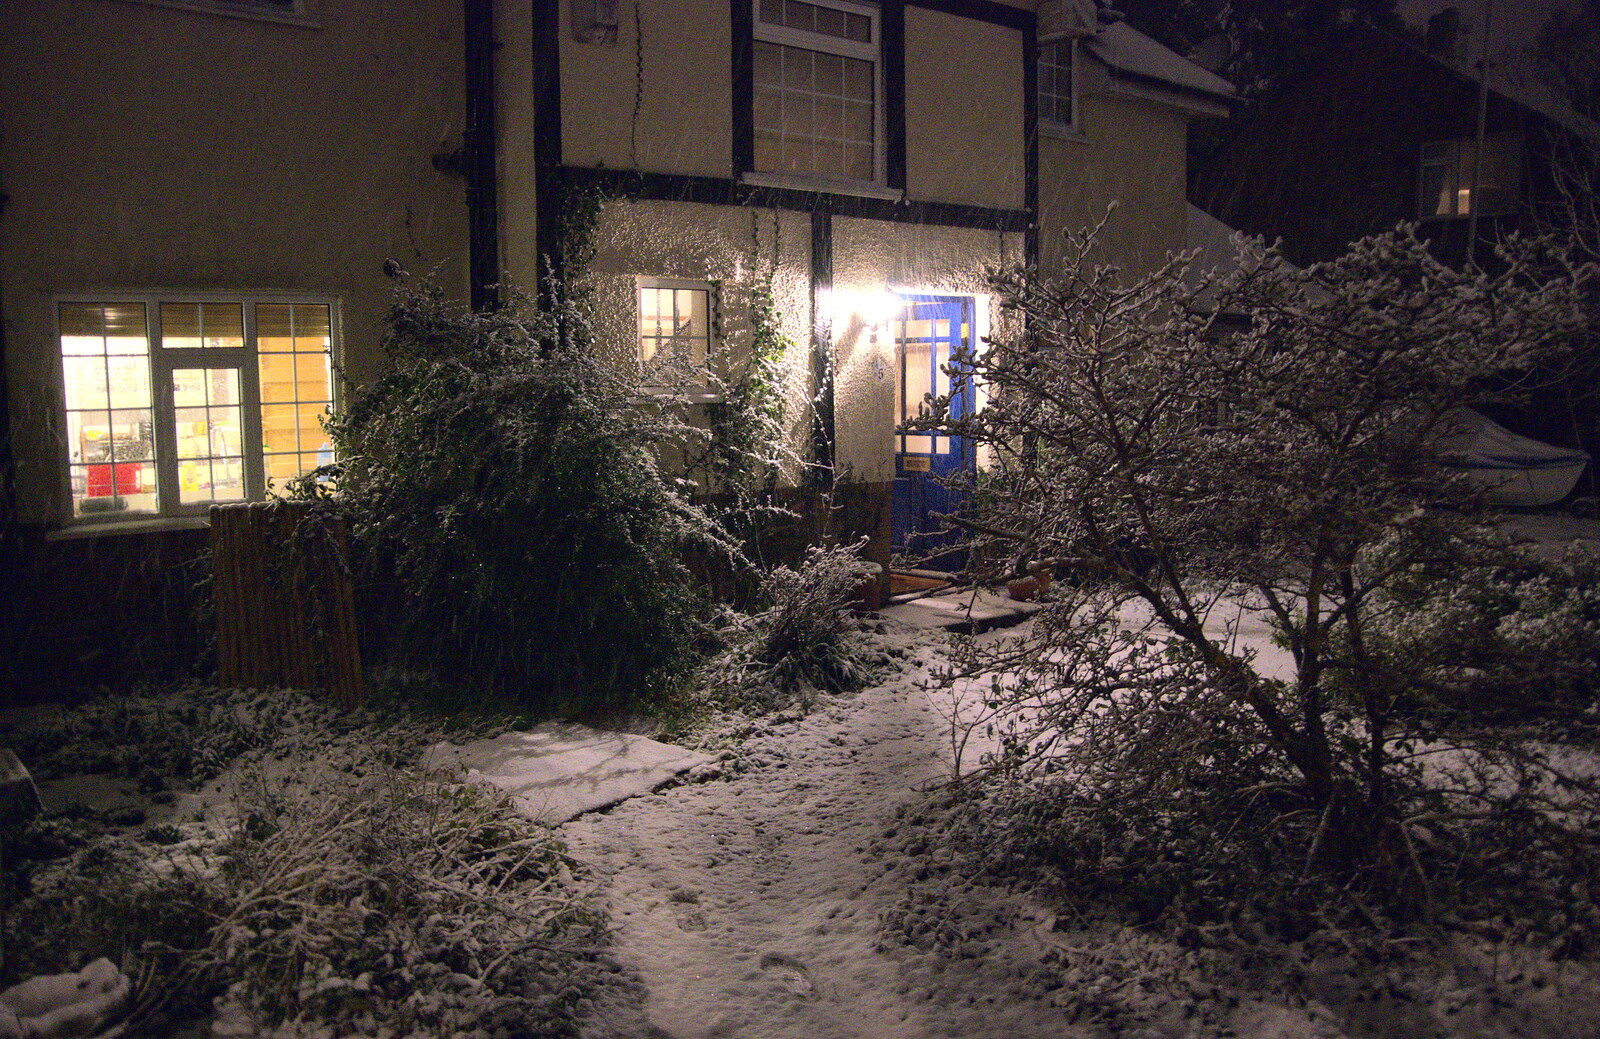 It's snowing in Sean's front garden from A Wintry Trip Down South, Walkford, Dorset - 1st February 2019